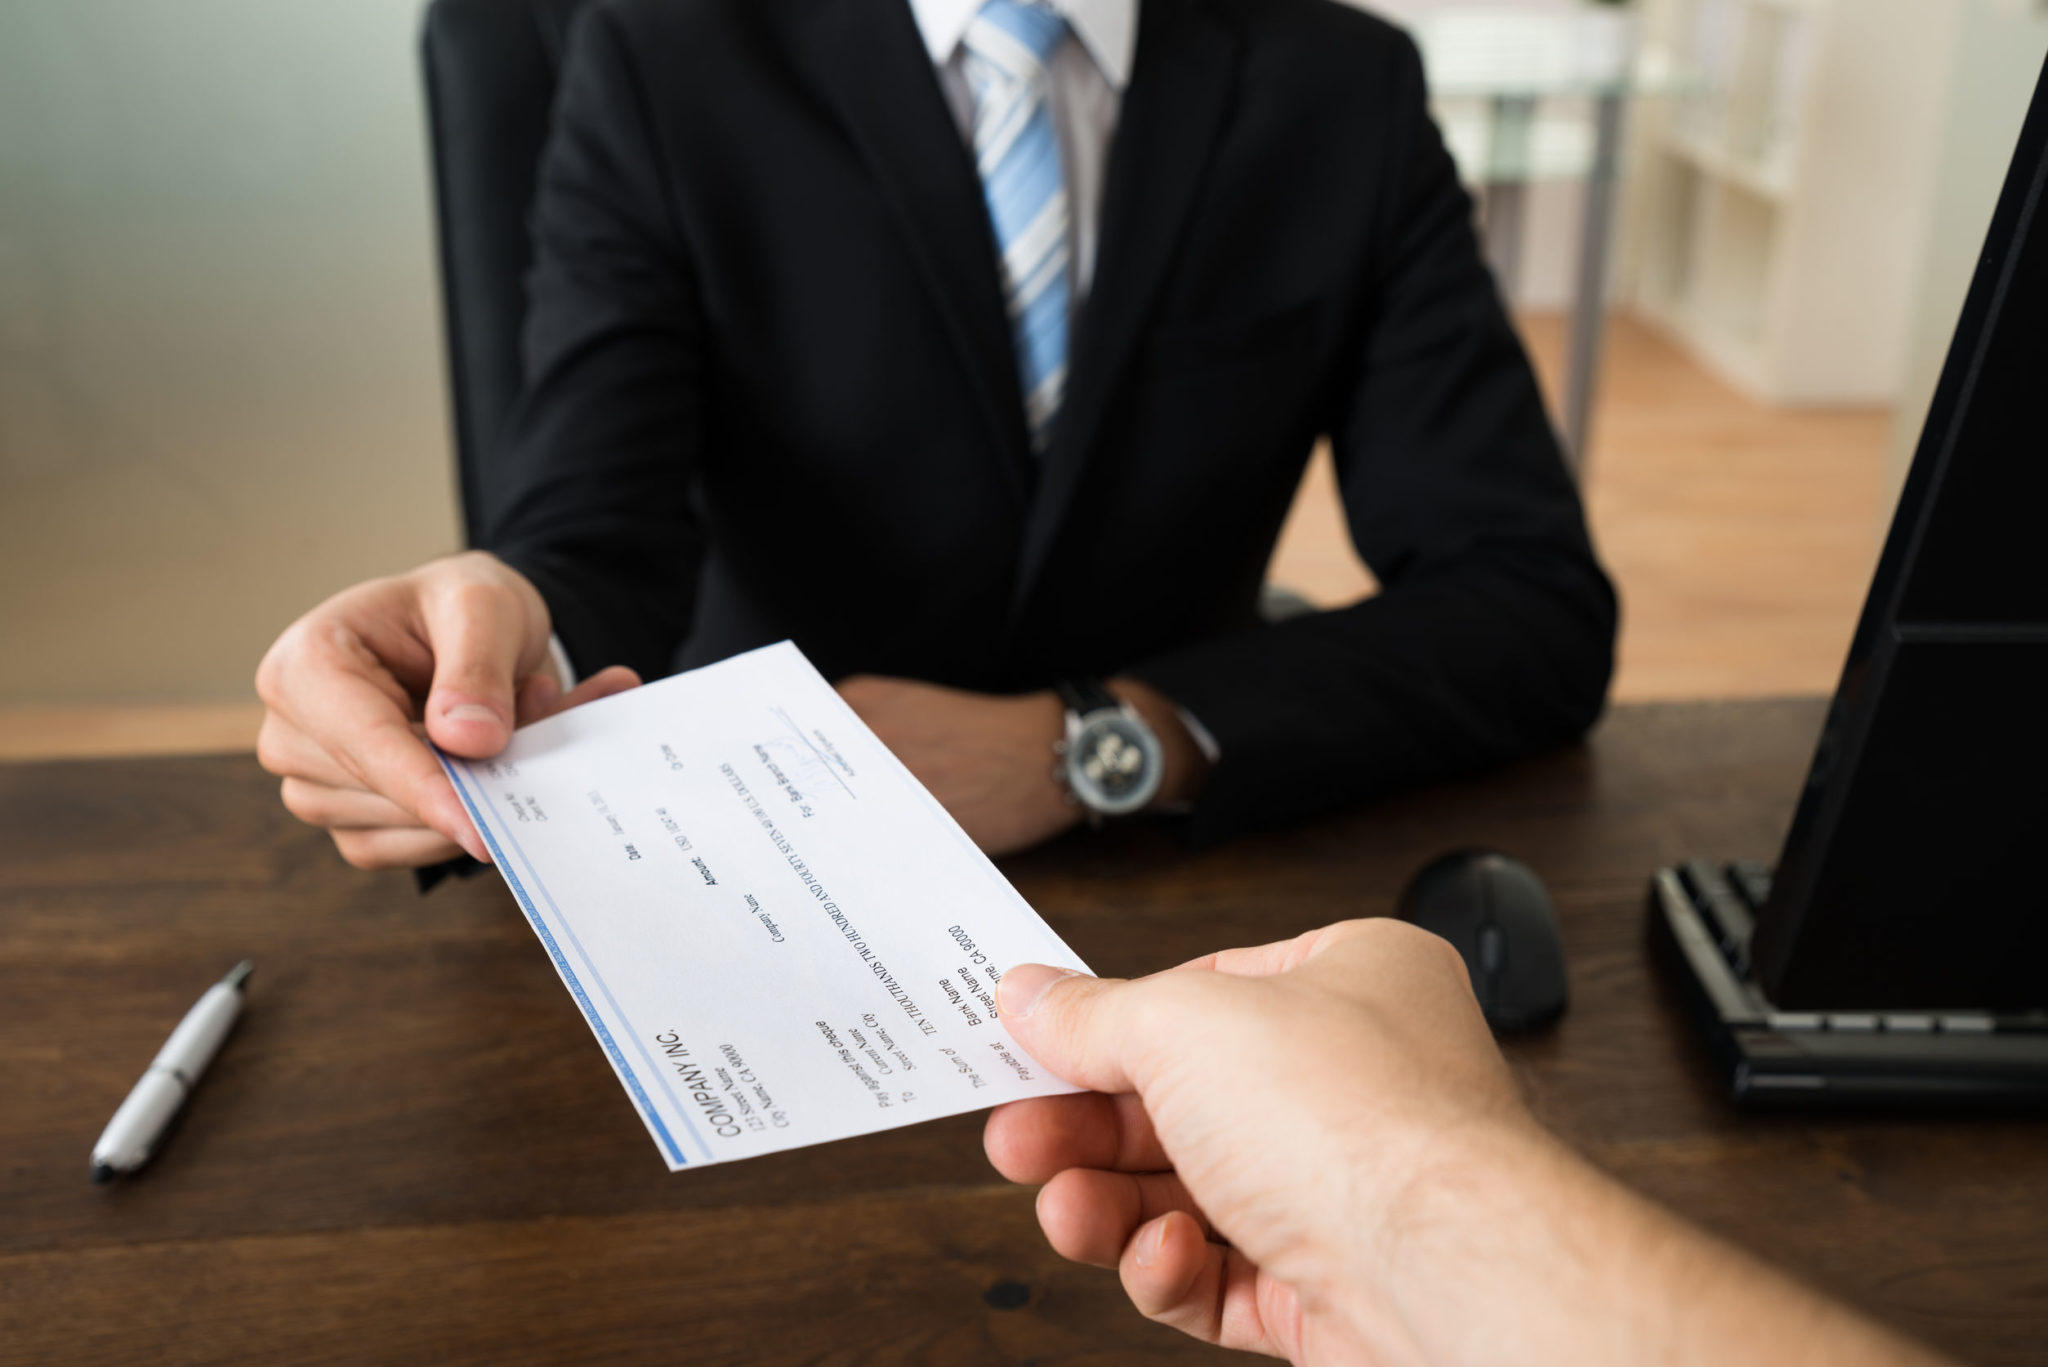 Is an employee on a fixed term contract entitled to a 13th cheque?